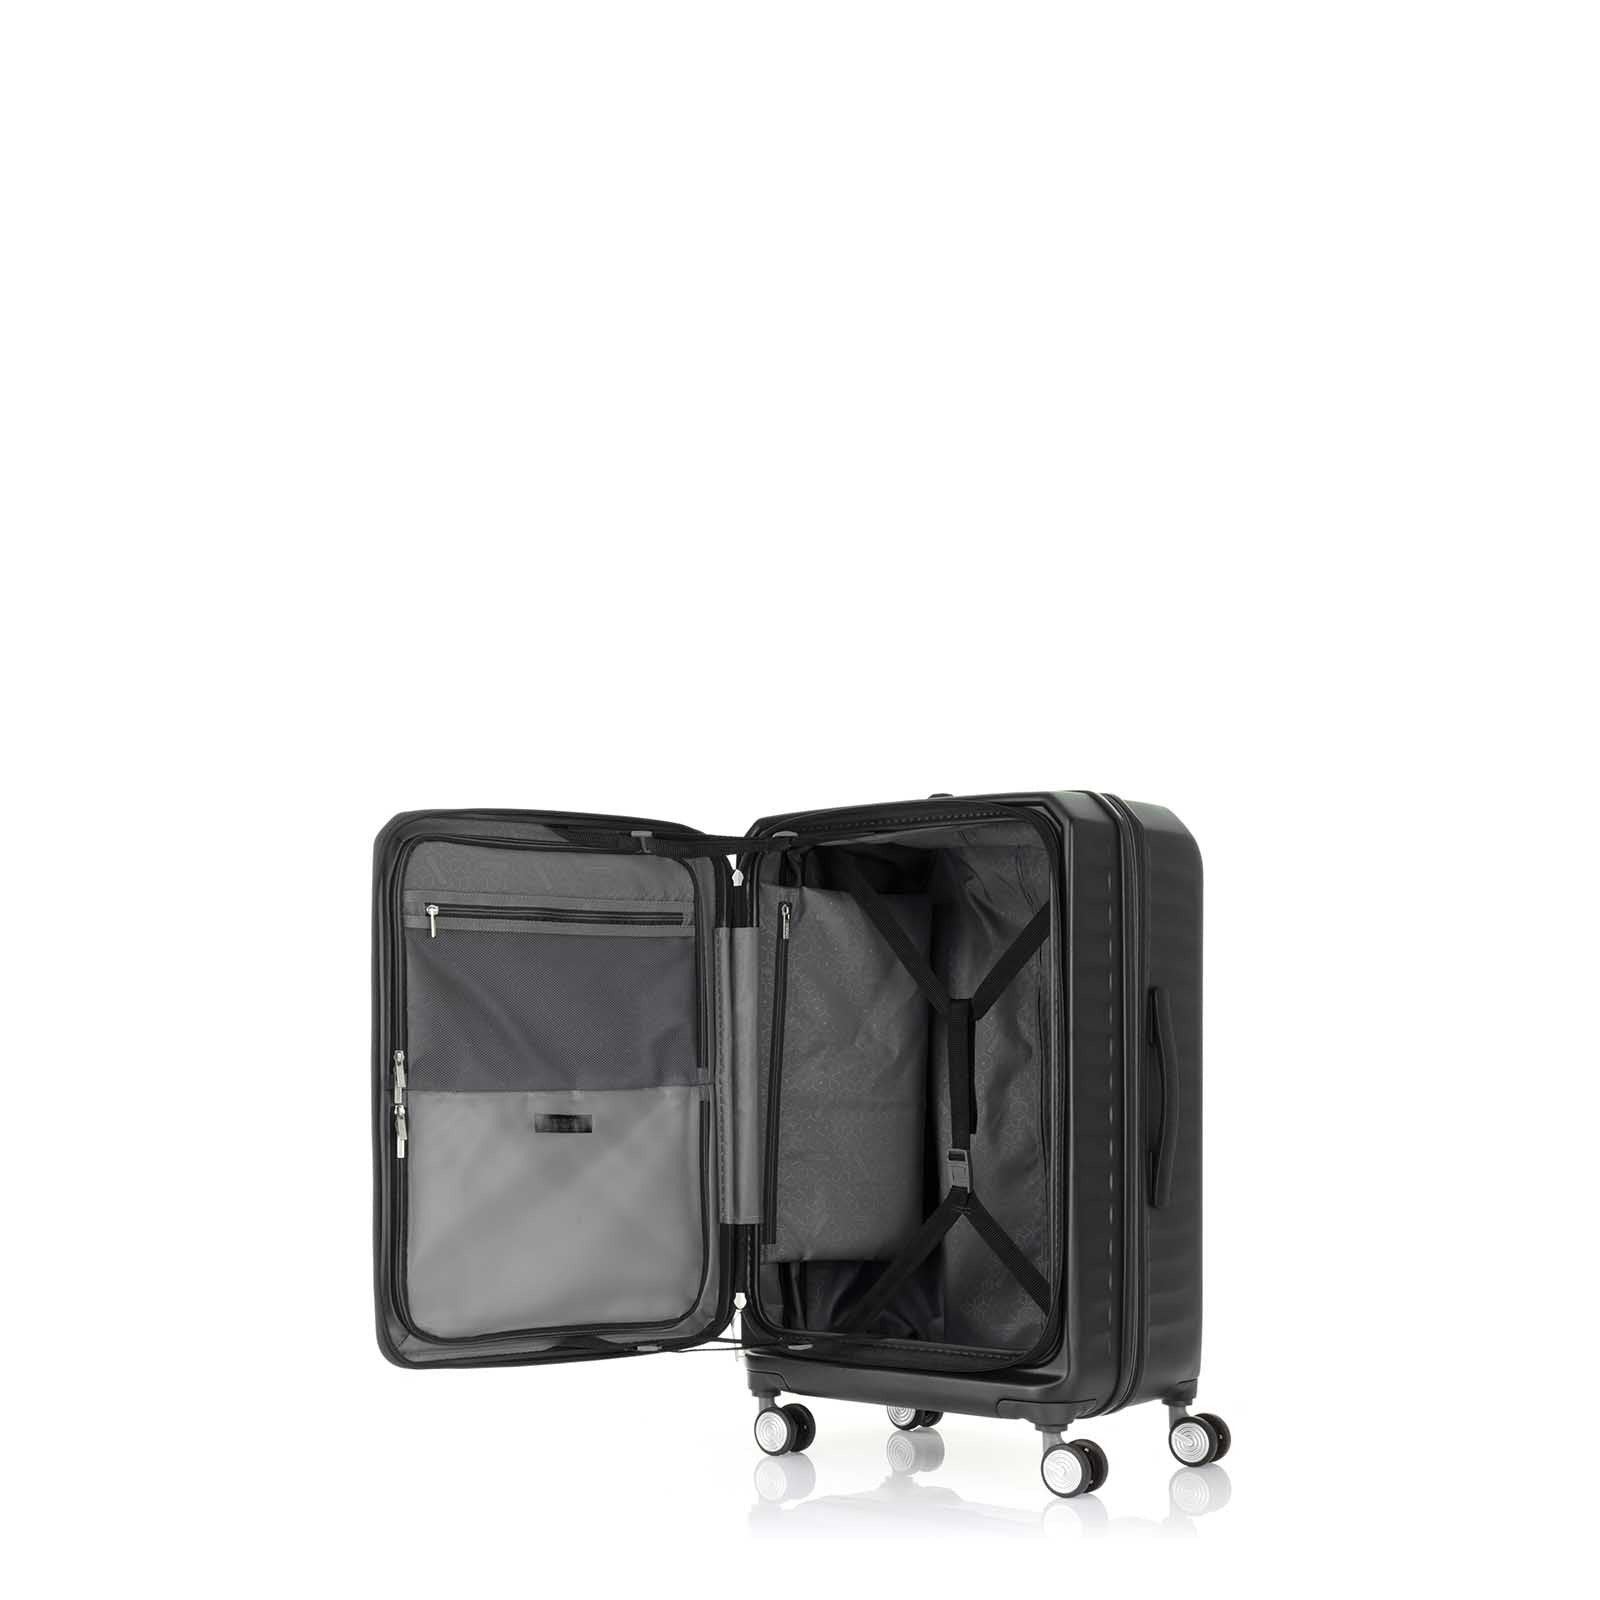 American-Tourister-Frontec-79cm-Suitcase-Jet-Black-Front-Opening